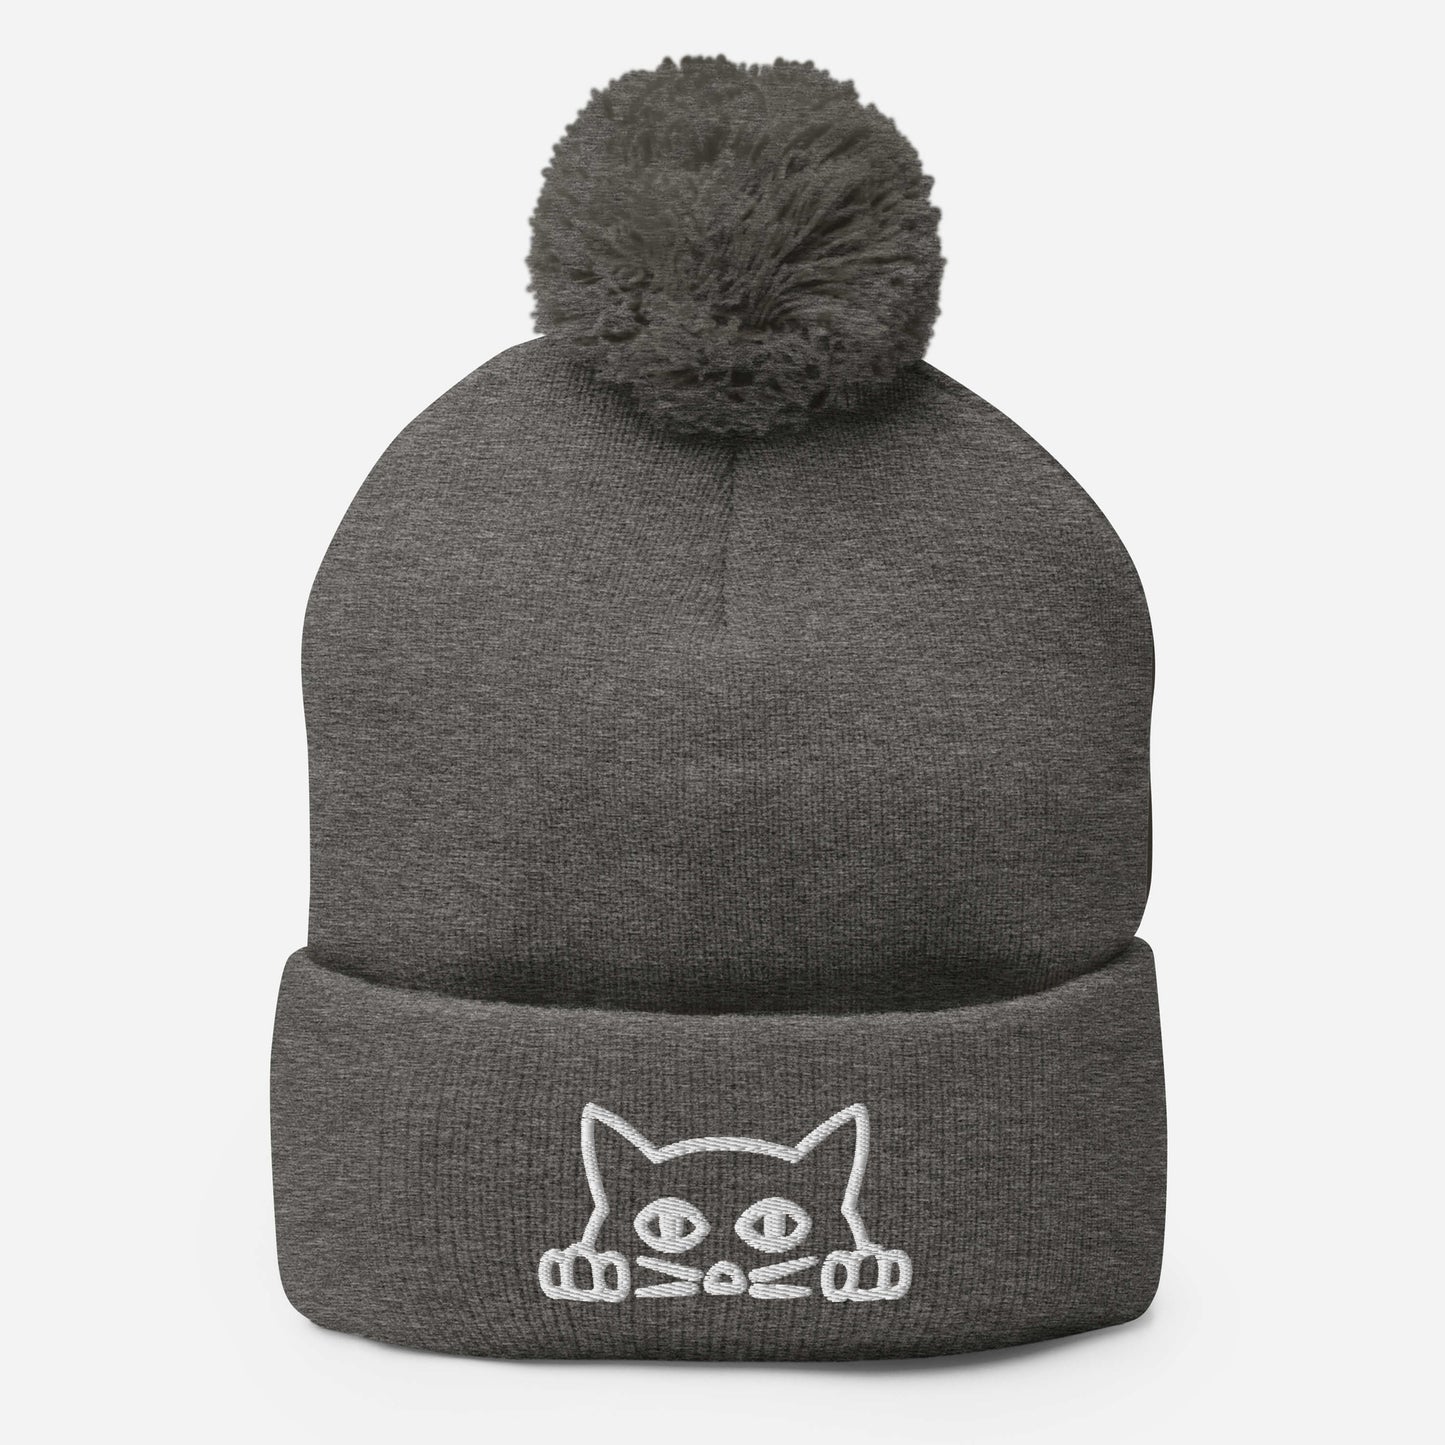 Embroidered hat with kitten pompom